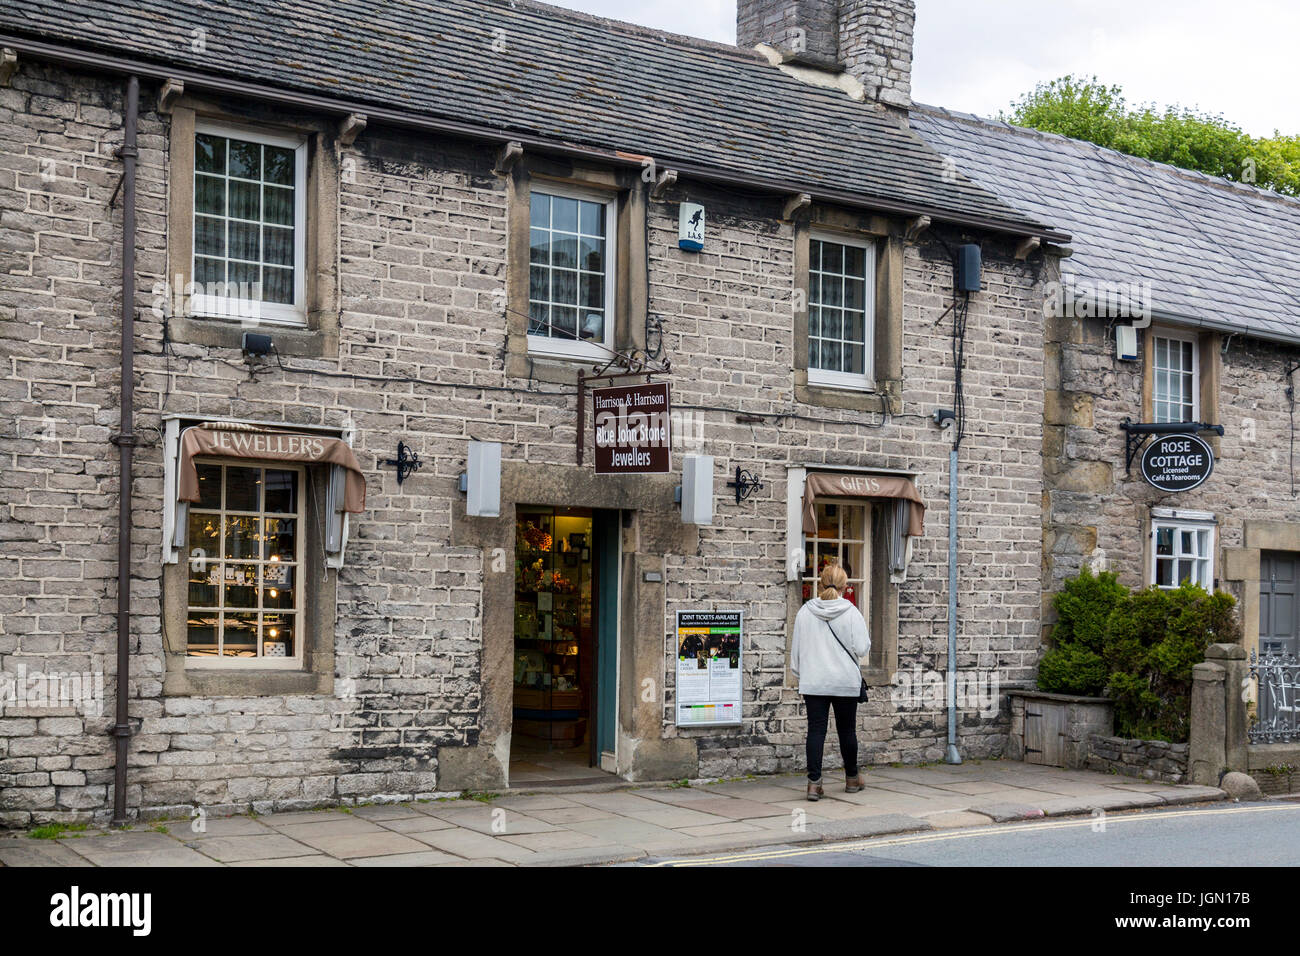 One of the jewellery and craft shops that sells items made from the local Blue John stone in Castleton, Peak District, Derbyshire, England, UK Stock Photo